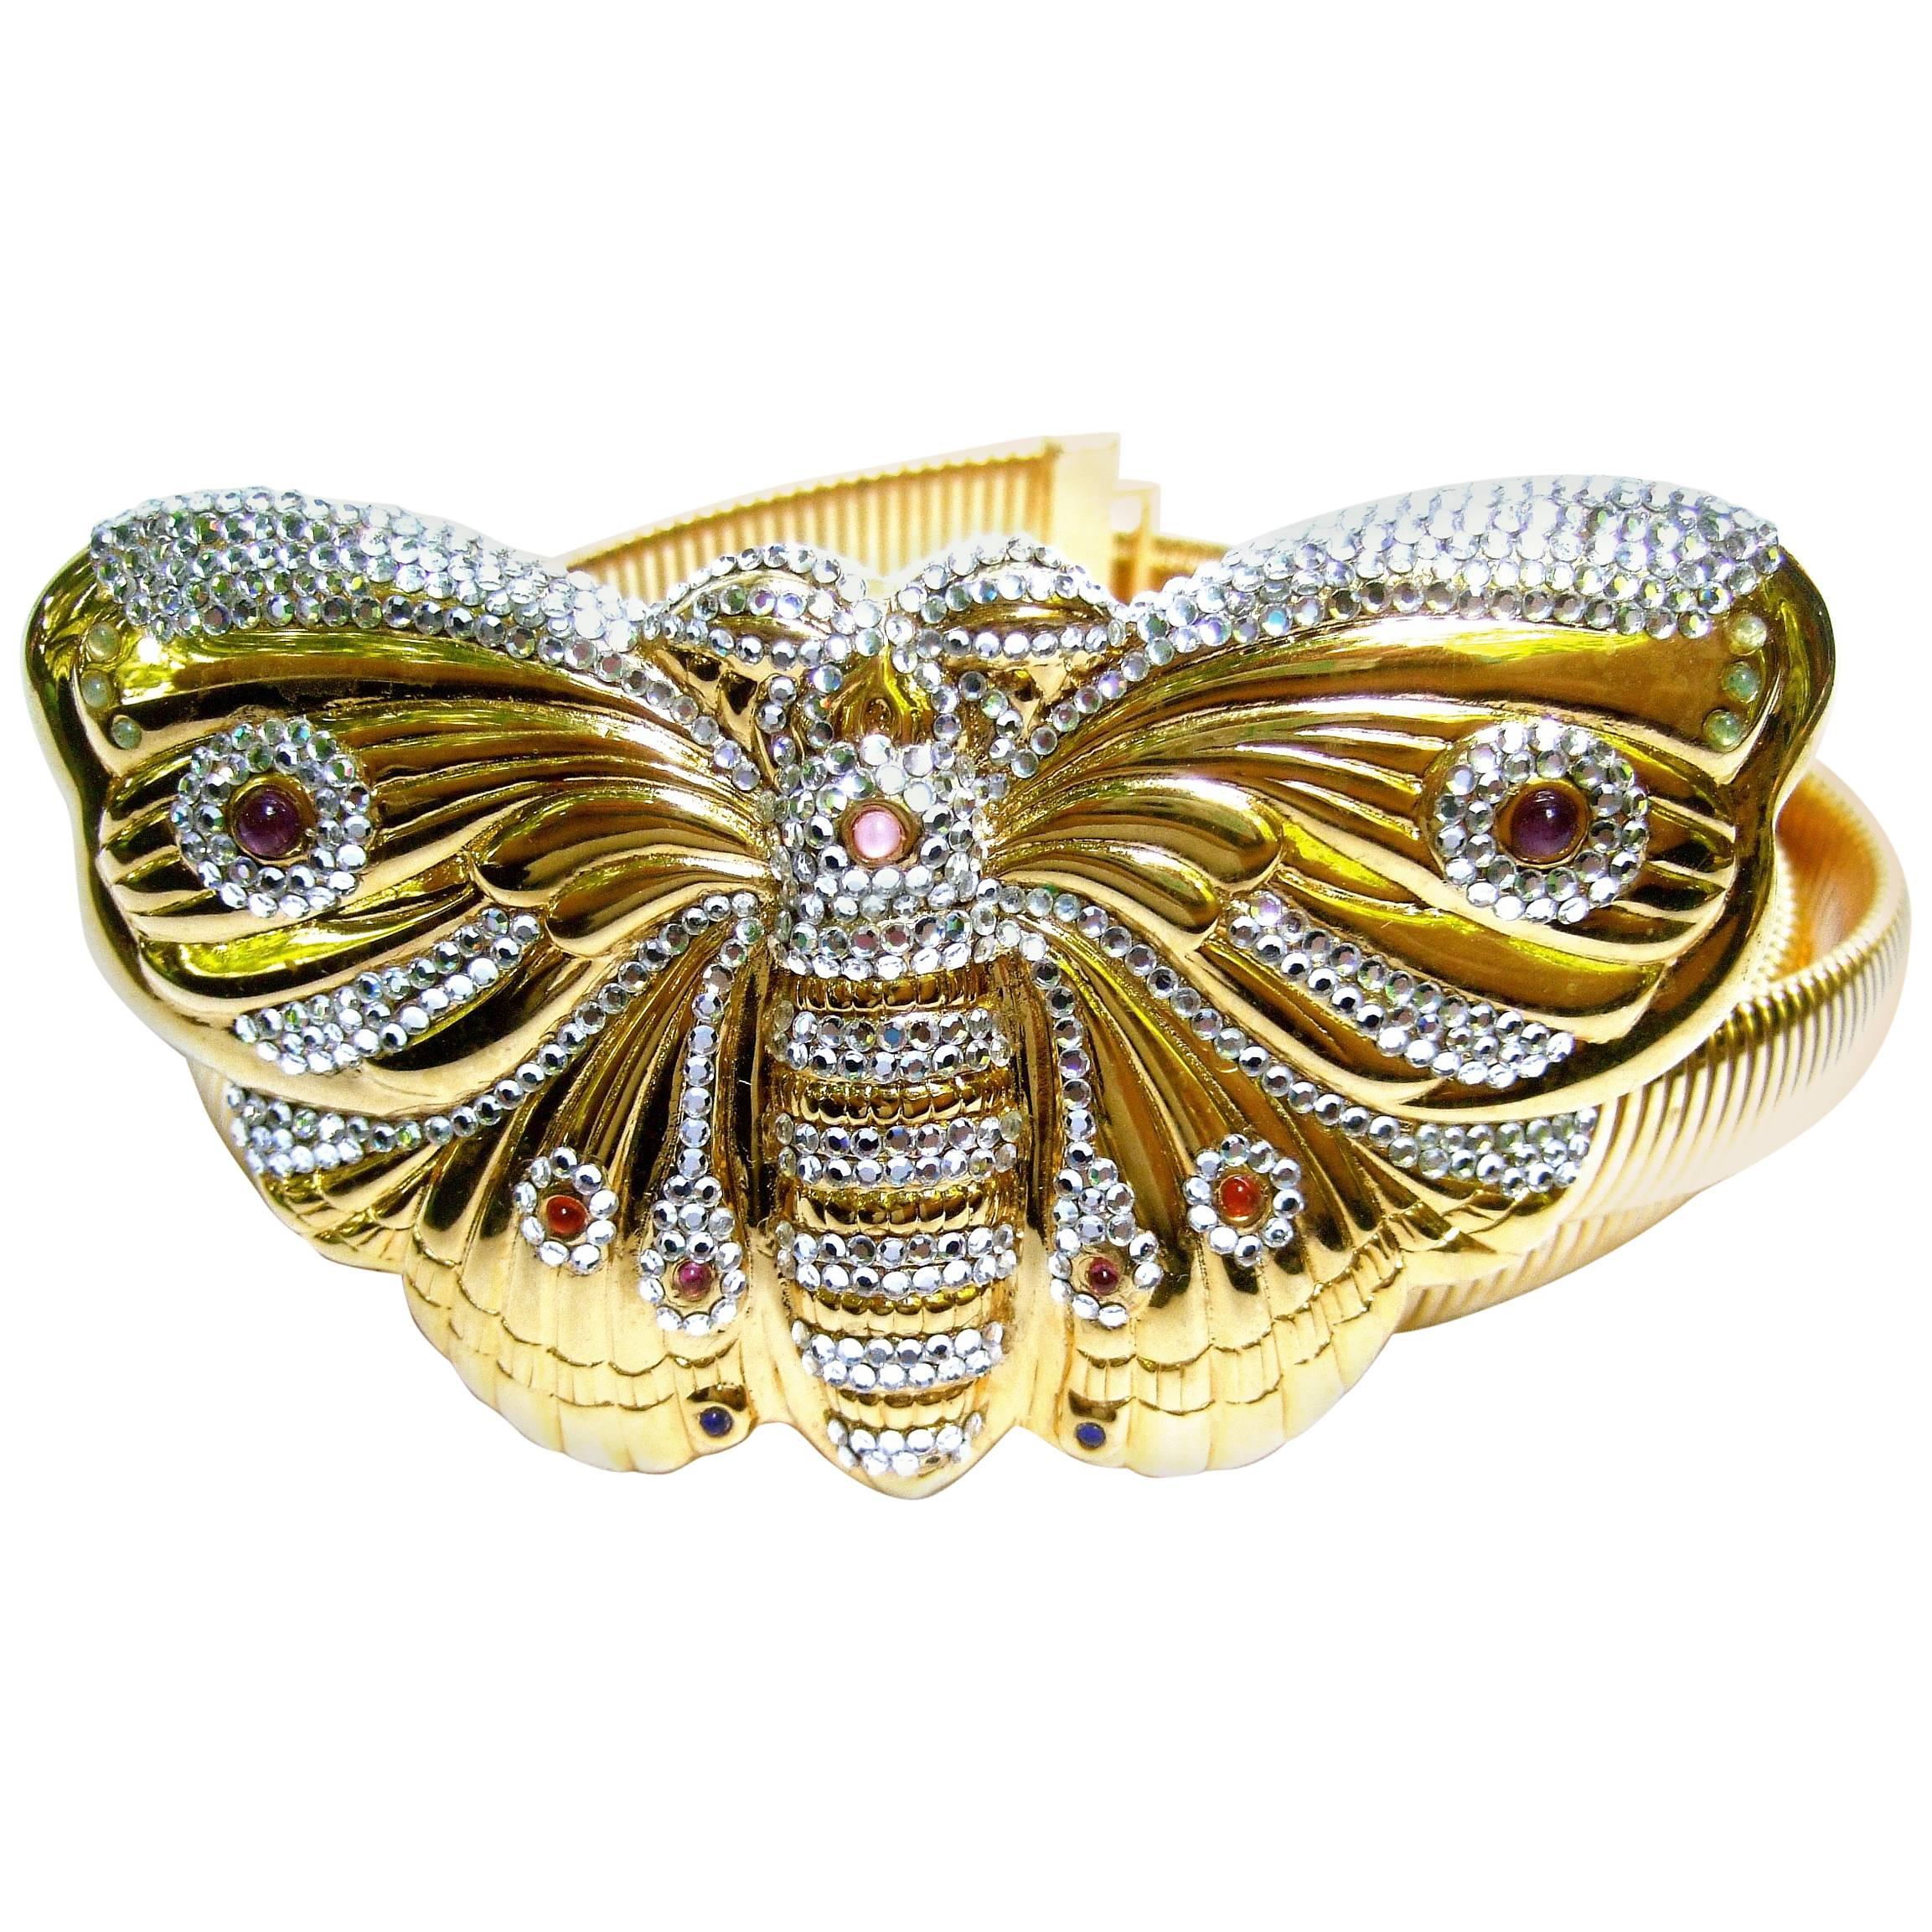 Judith Leiber Exquisite Massive Jeweled Butterfly Belt circa 1980s